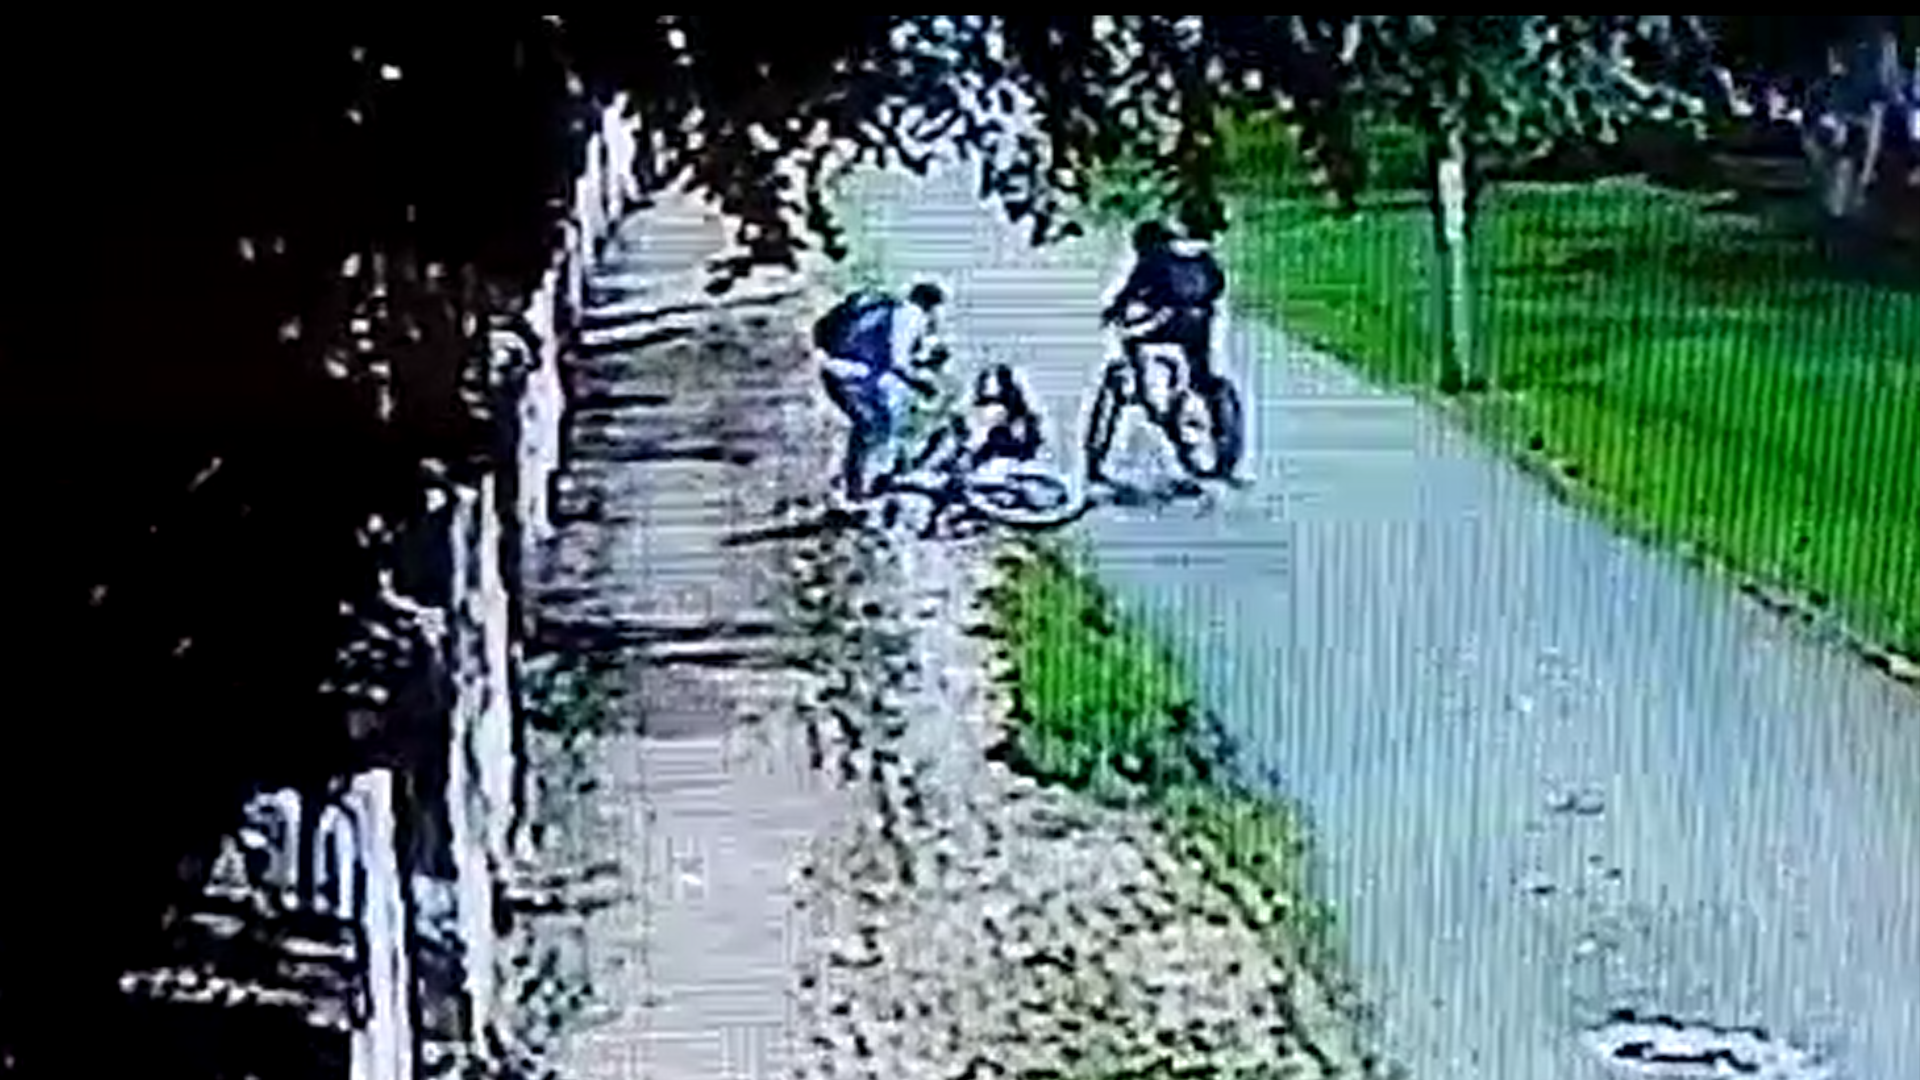 A second recording of a security camera was released on Boyacá avenue between 127th and 128th streets where two thieves violently assaulted a cyclist who they threw to the ground and stripped her of her belongings.  (Screenshot)